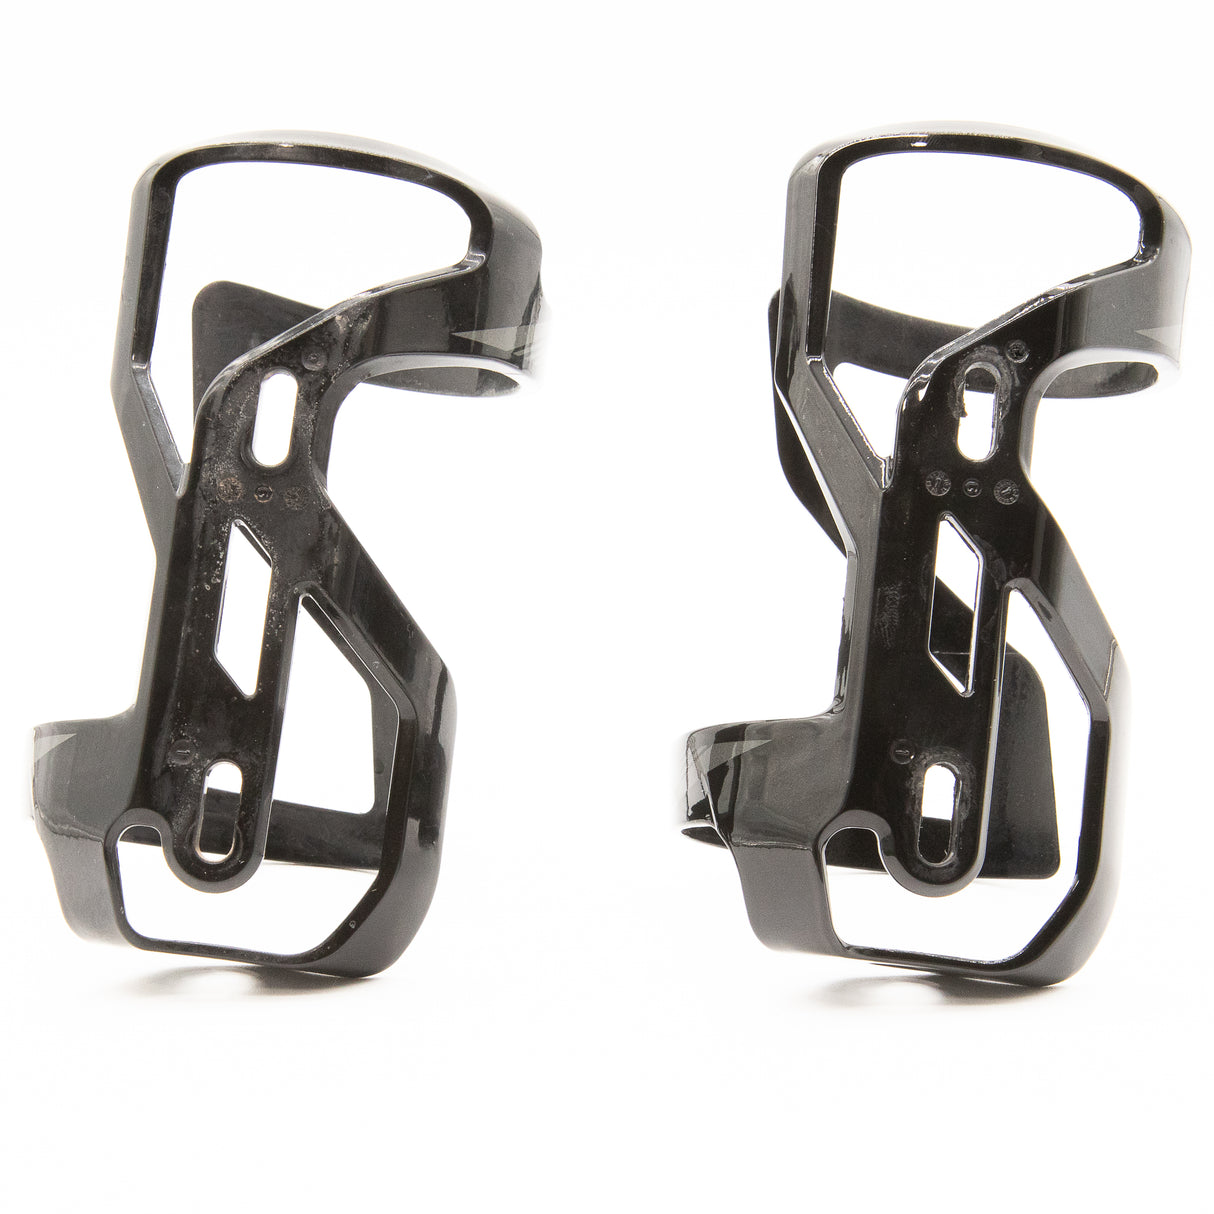 Specialized Zee II Bicycle Bottle Cages Pair Right Load Black Gloss 83g